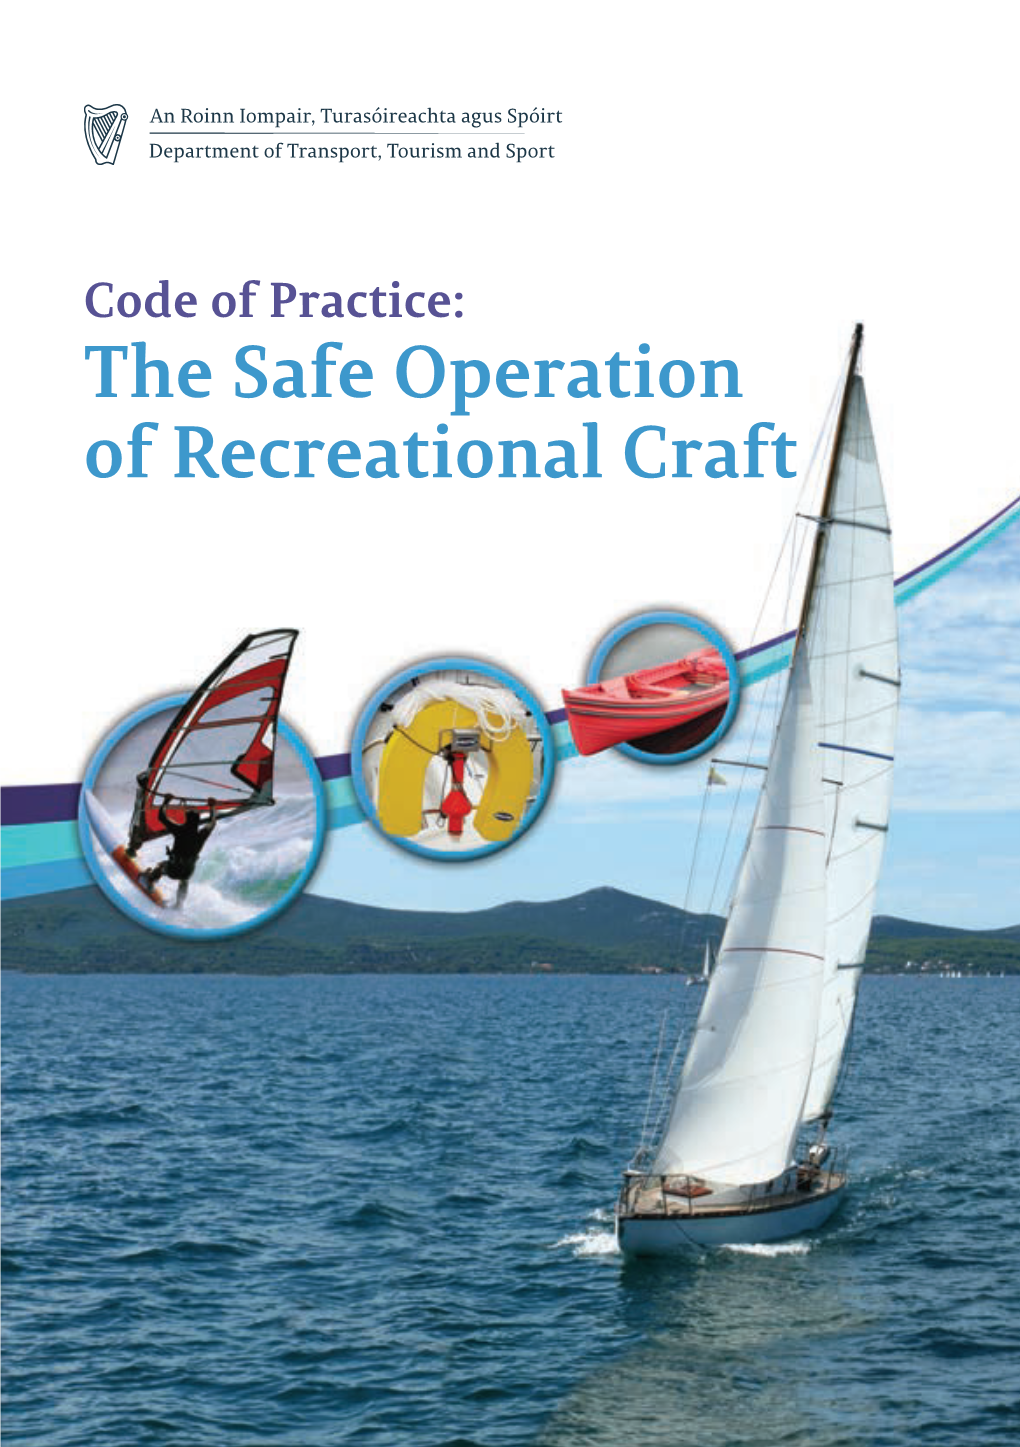 Code of Practice: Operation the Safe of Craft Recreational